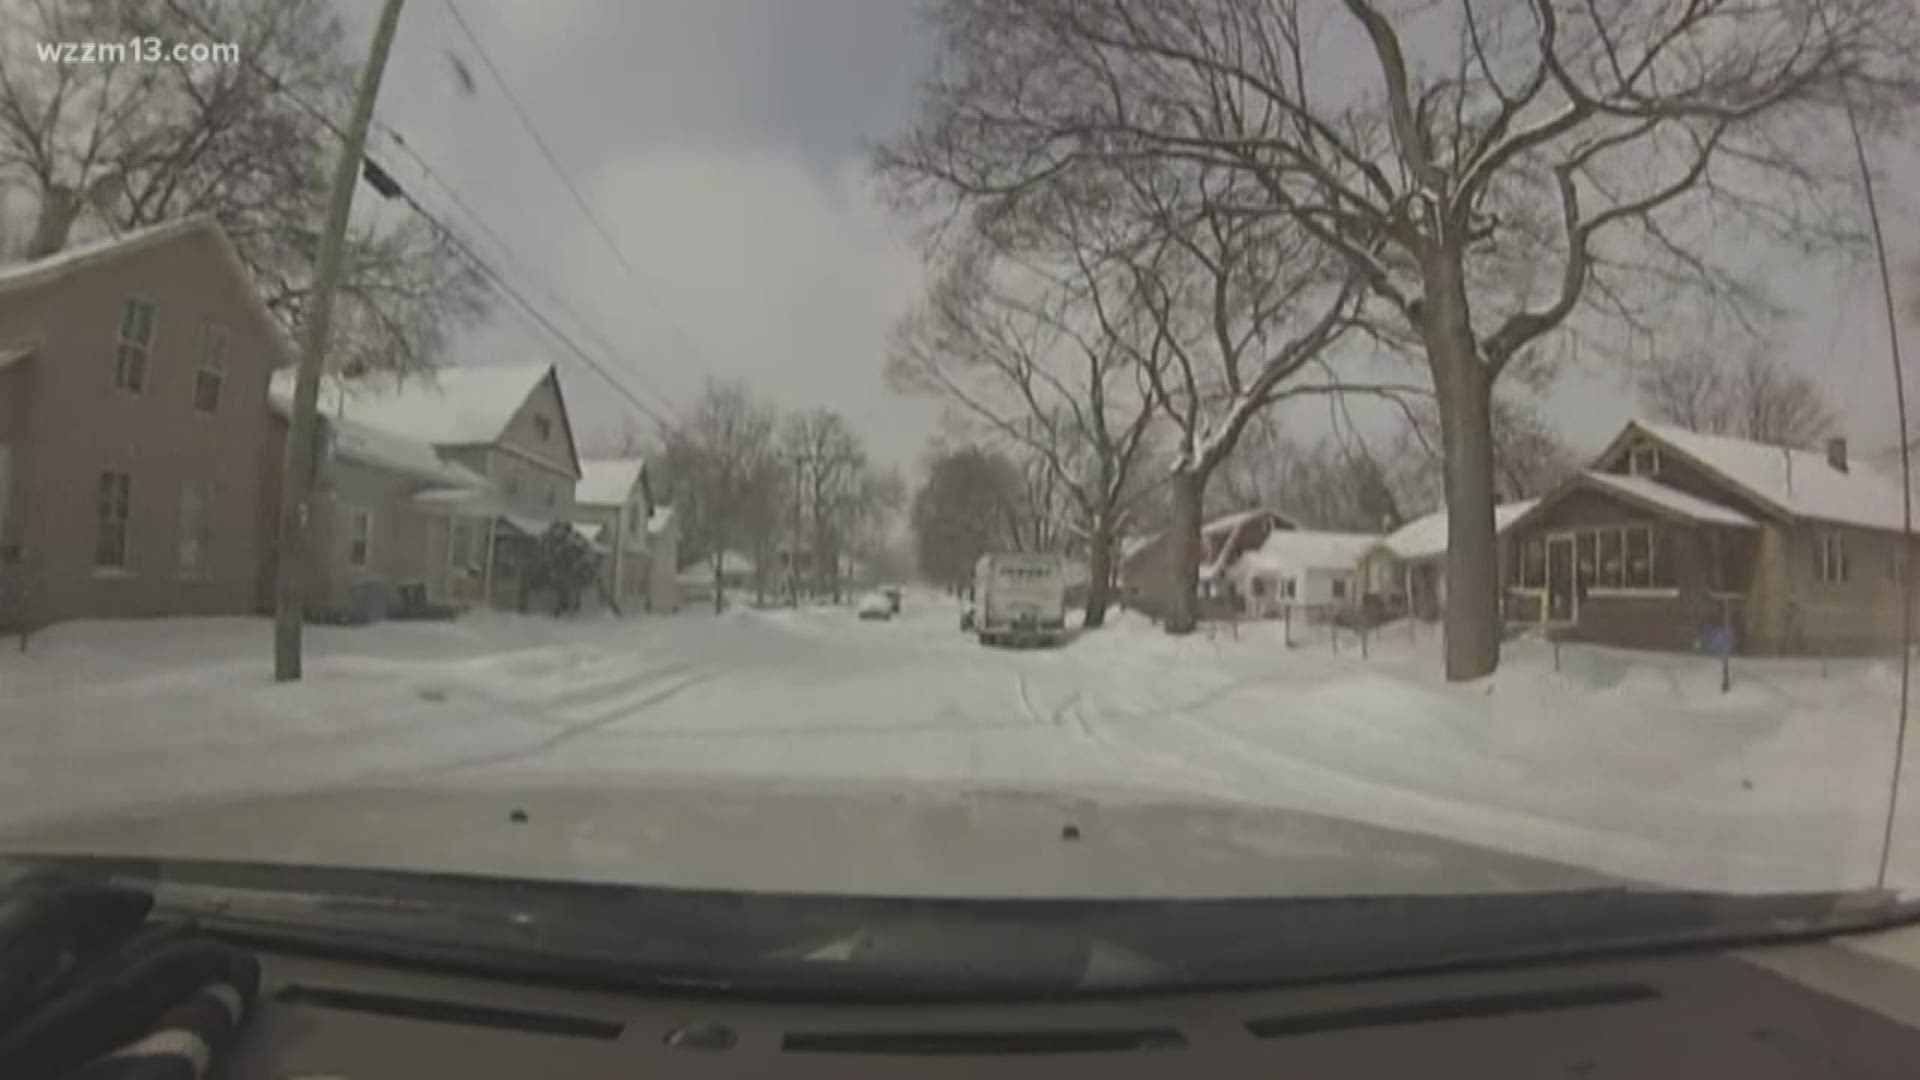 13 ON YOUR SIDE's Nina DeSarro shares what roads are looking like on the Westside of Grand Rapids Tuesday afternoon, after an ugly morning commute.